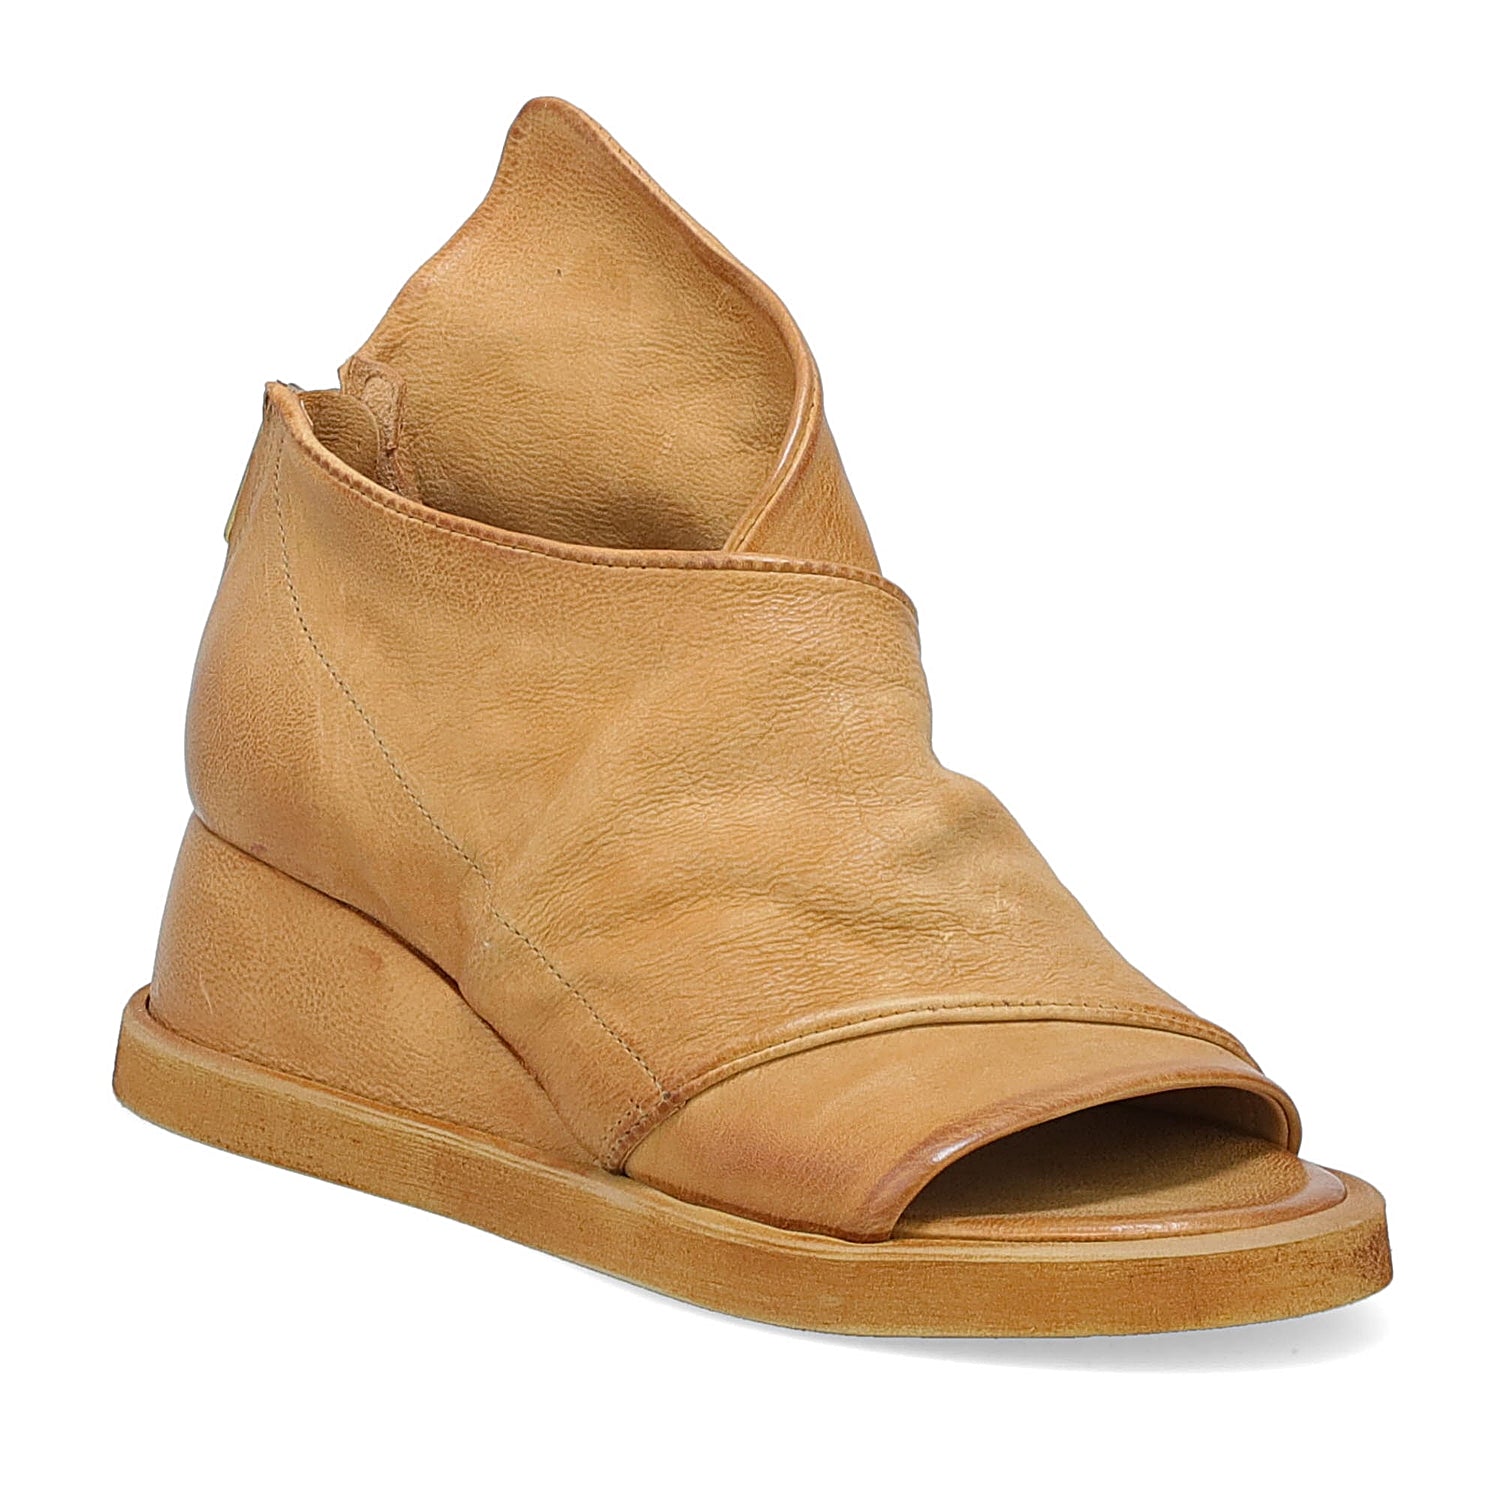 outer front side view of the A.S.98 Craig wedge in Camel.